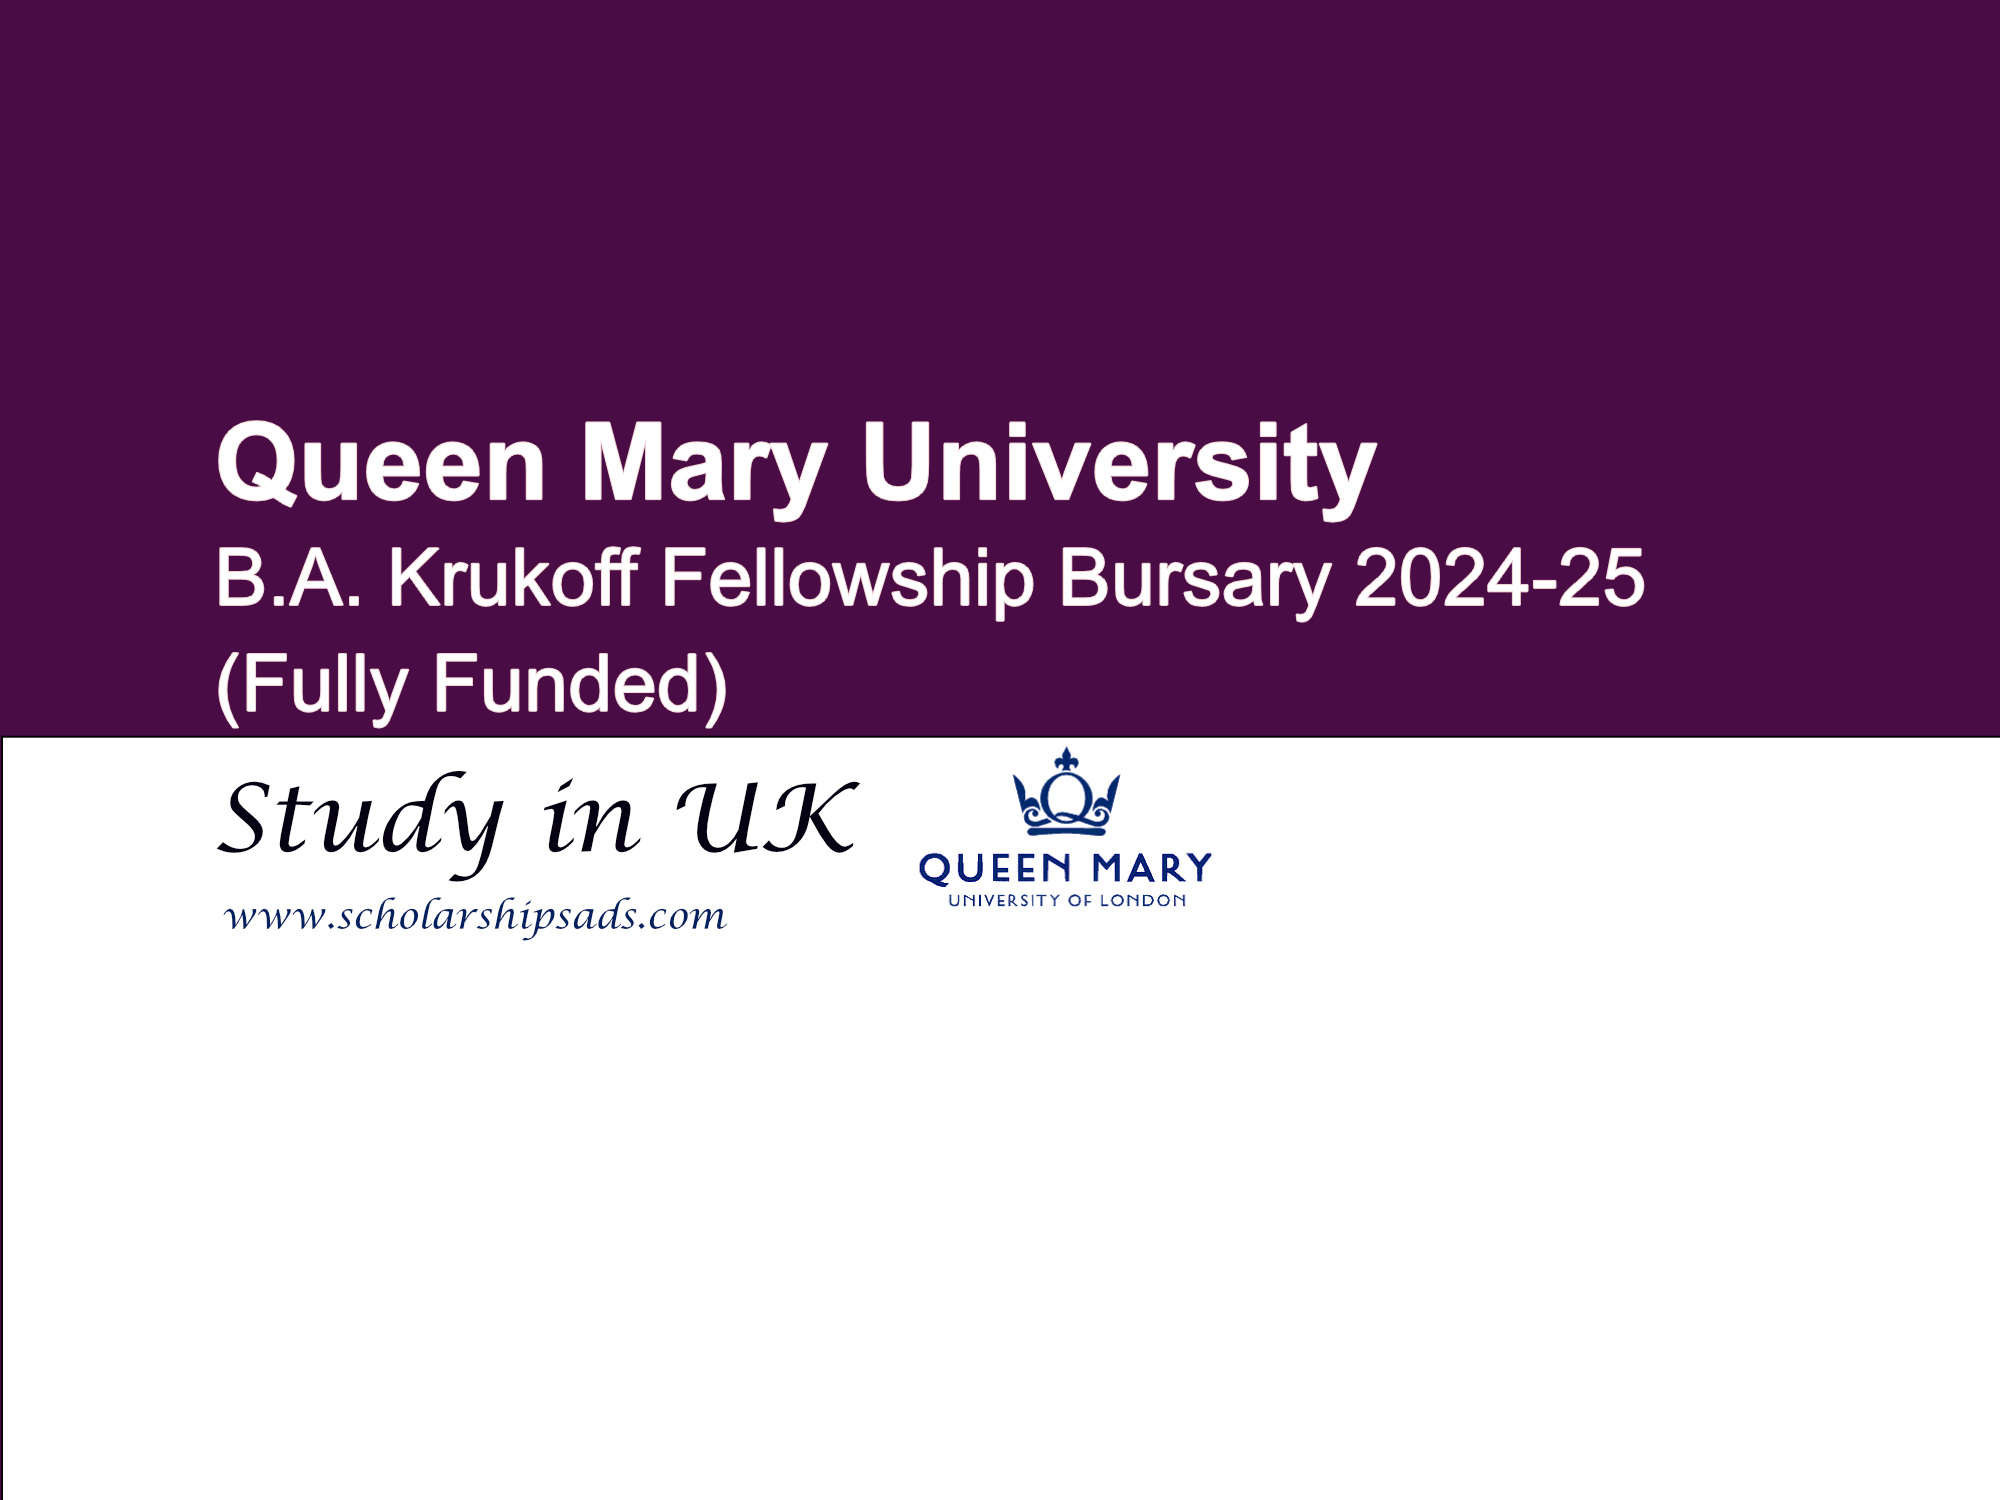 B. A. Krukoff Fellowships 2024 in UK - Queen Mary University .(Fully Funded)